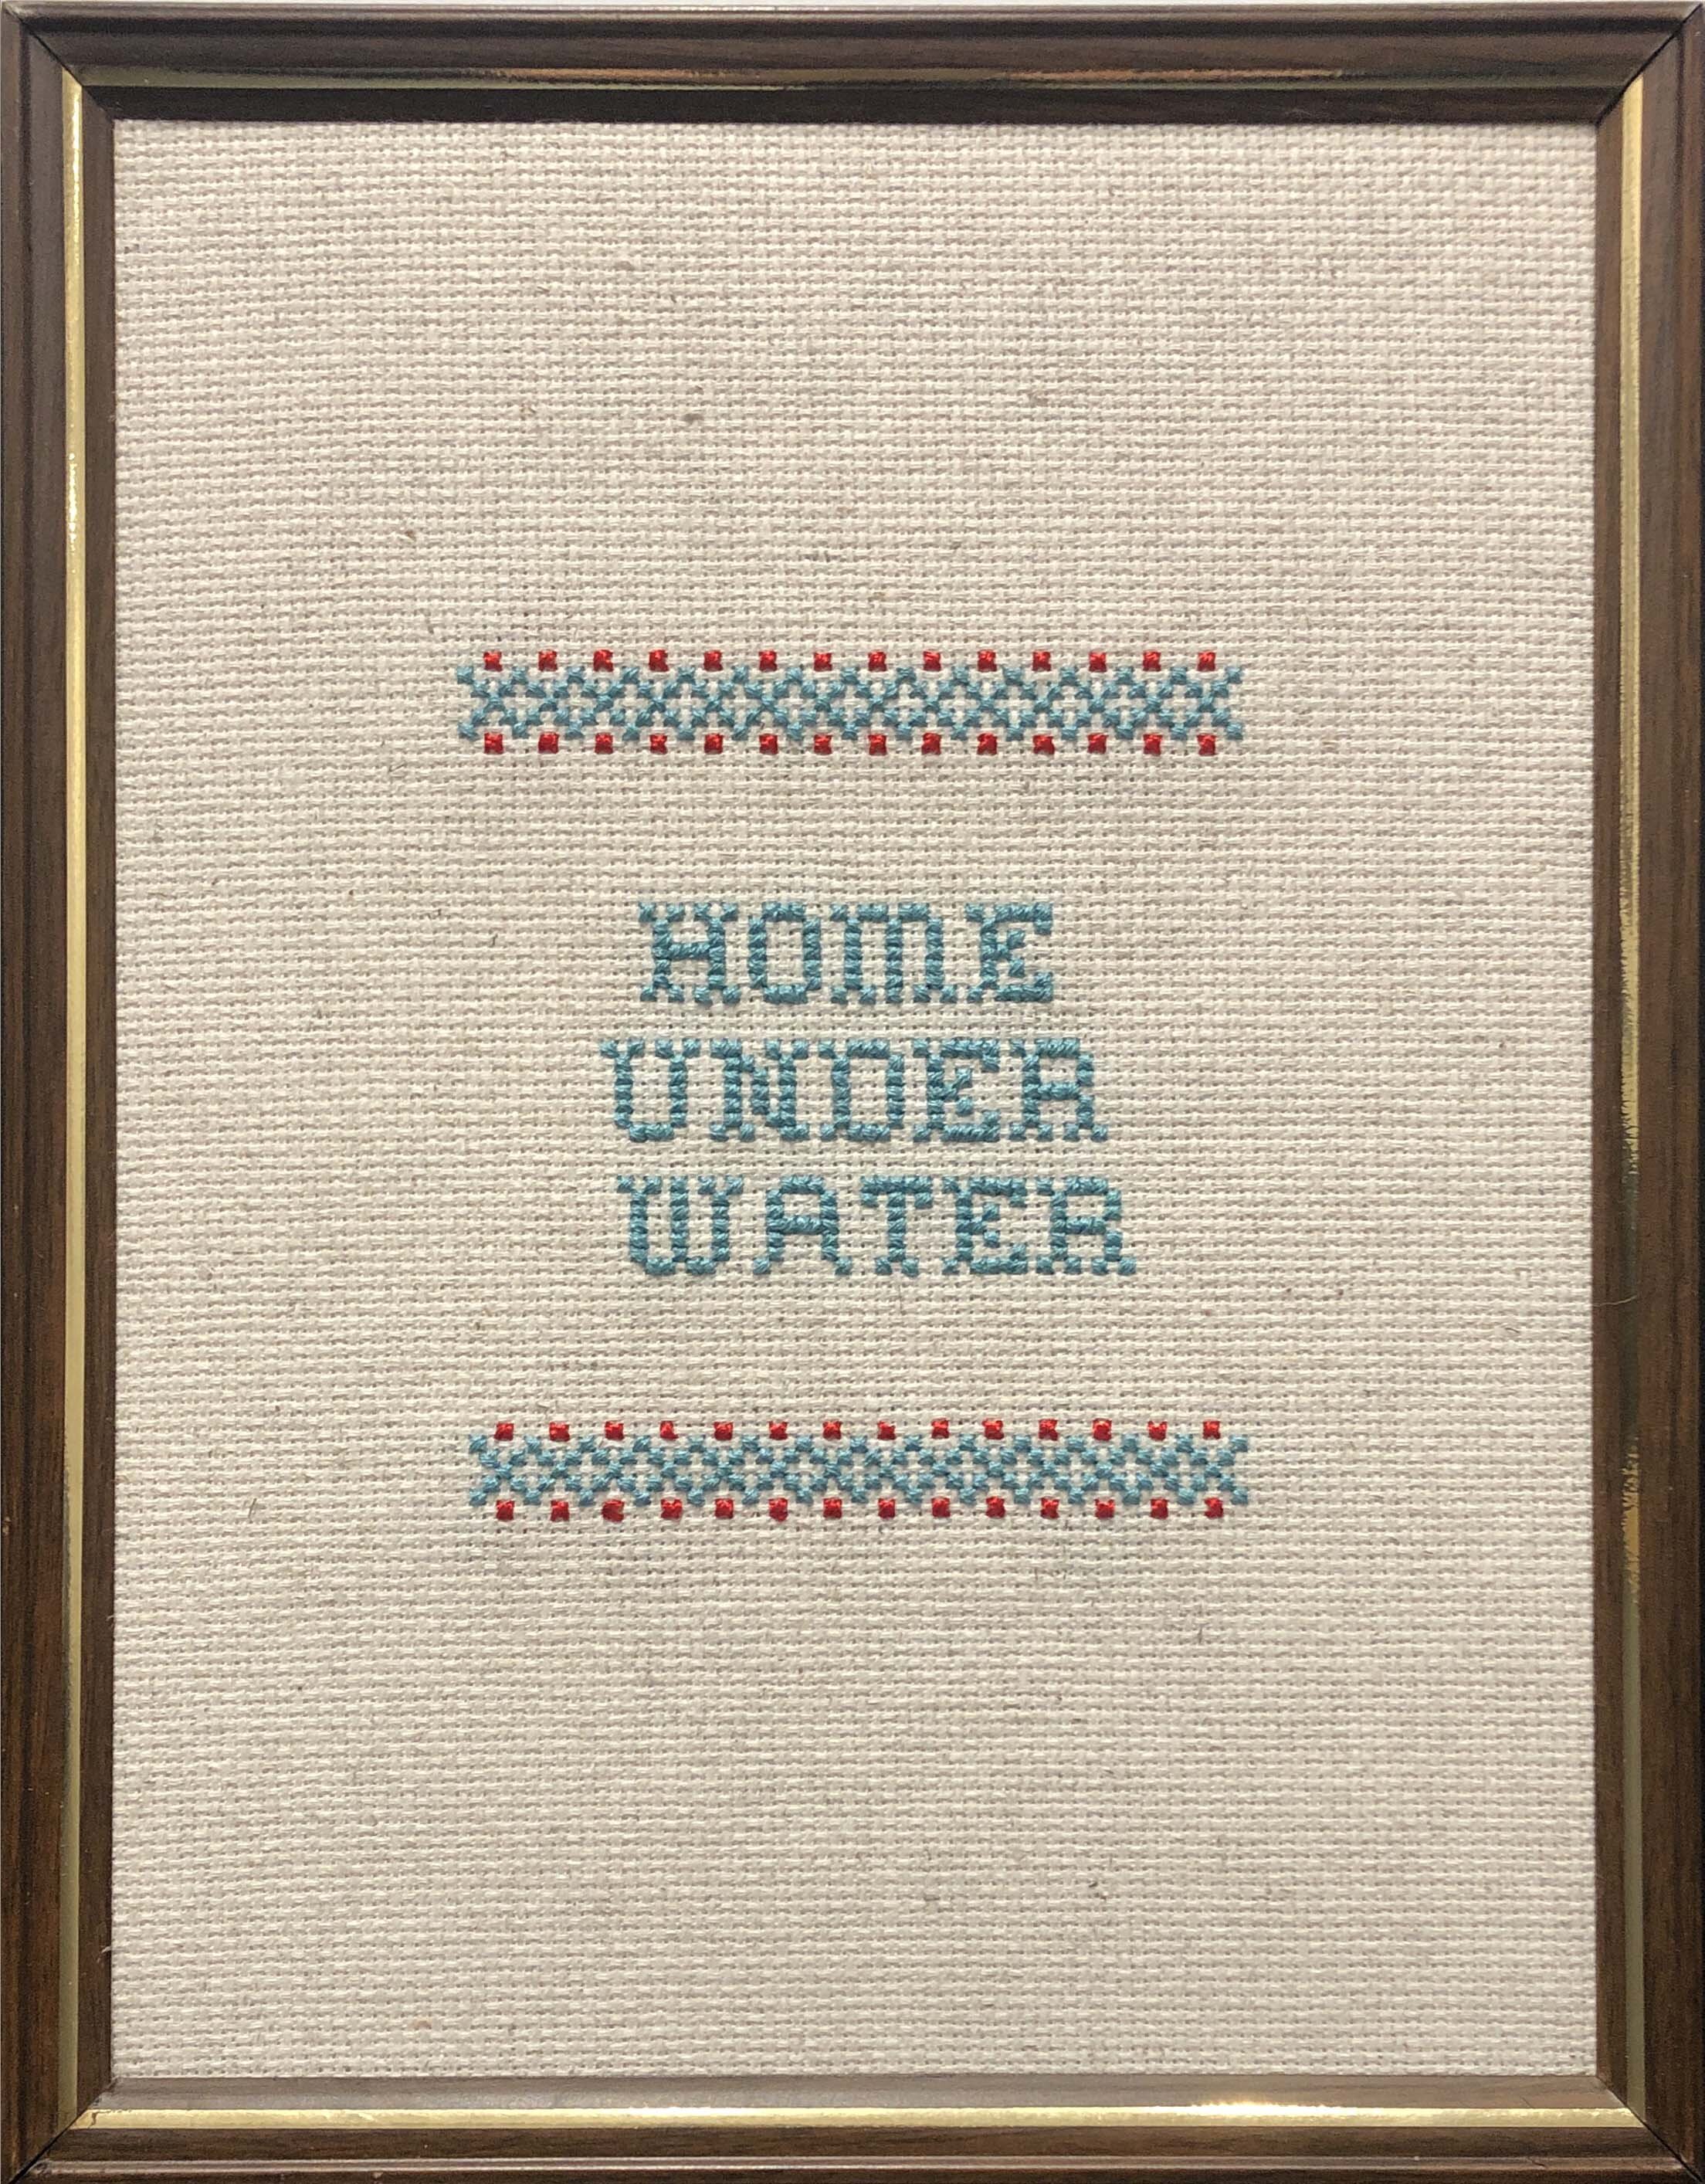   Home Under Water , embroidery floss on Aida cloth, vintage frame, 7" x 7", 2014 